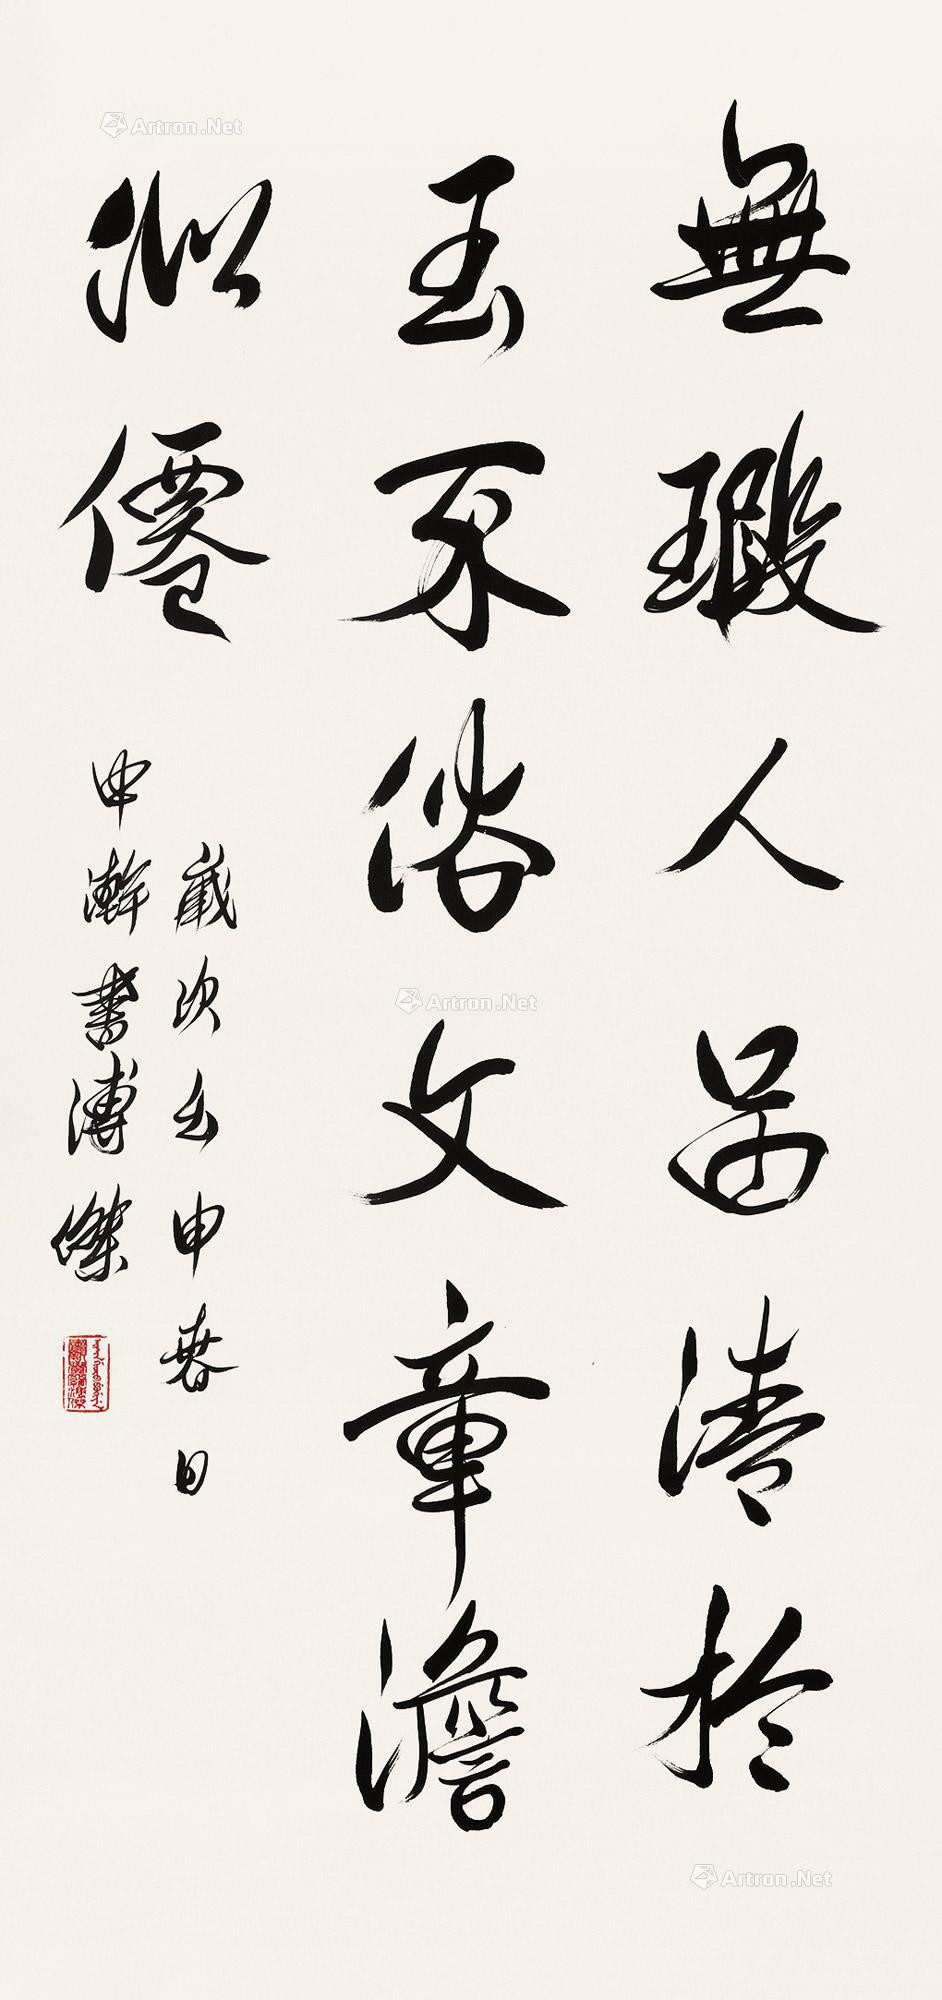 Calligraphy by Pu Jie